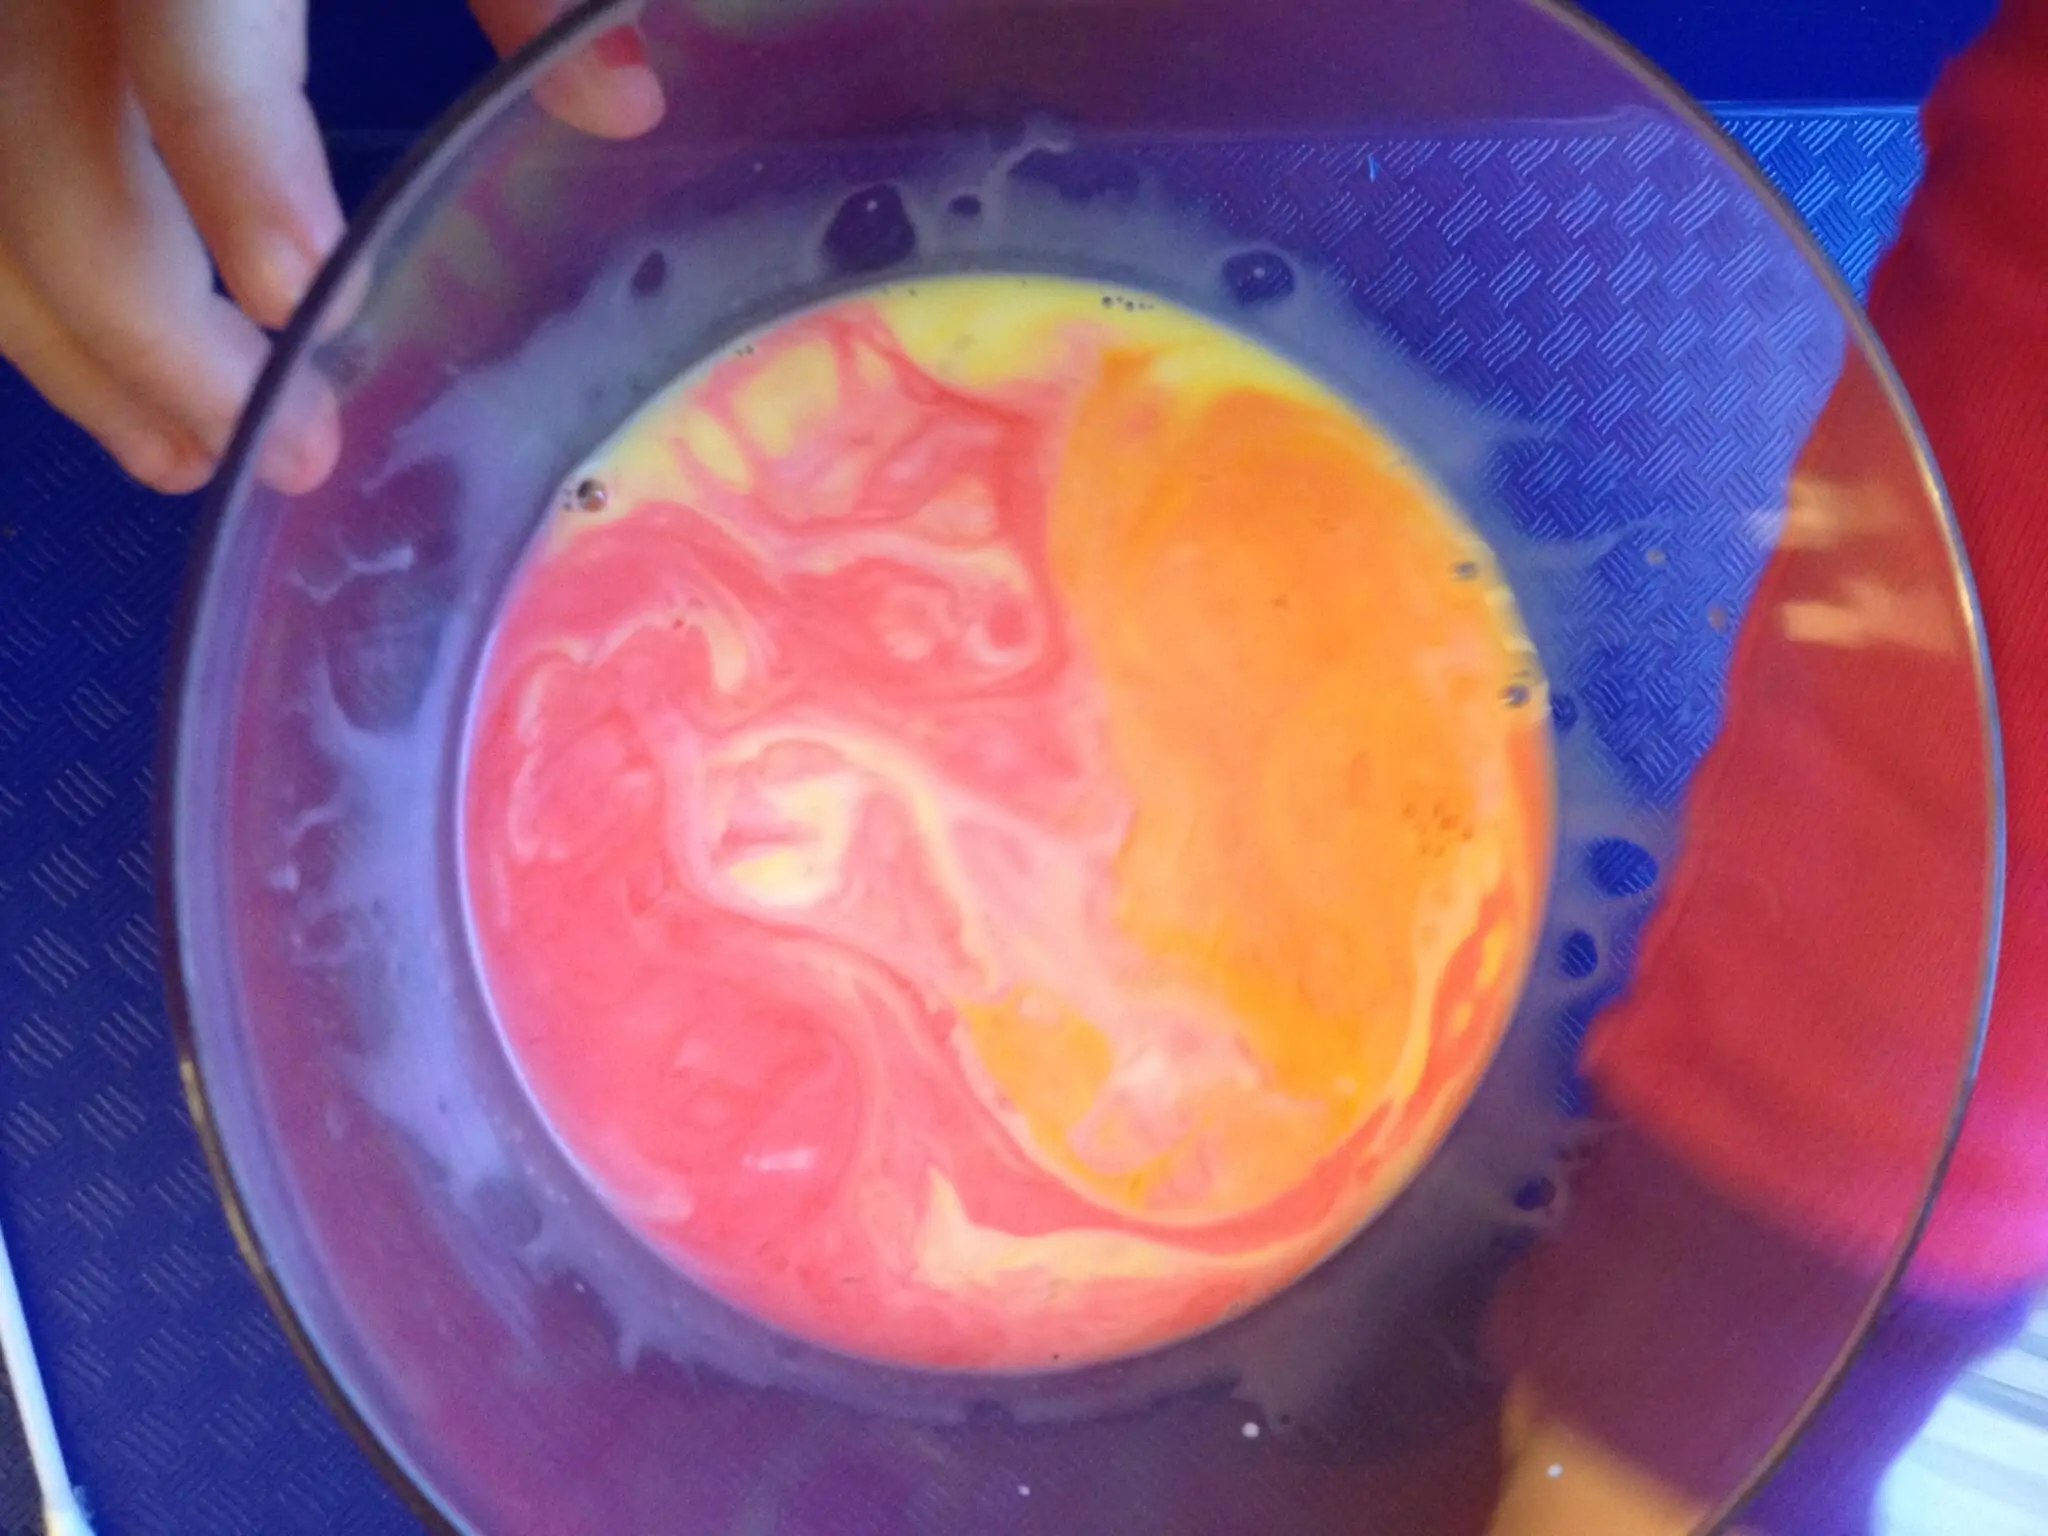 milk and dish soap experiment: after the colours settle, you get this fun marbled effect that can be used as paint